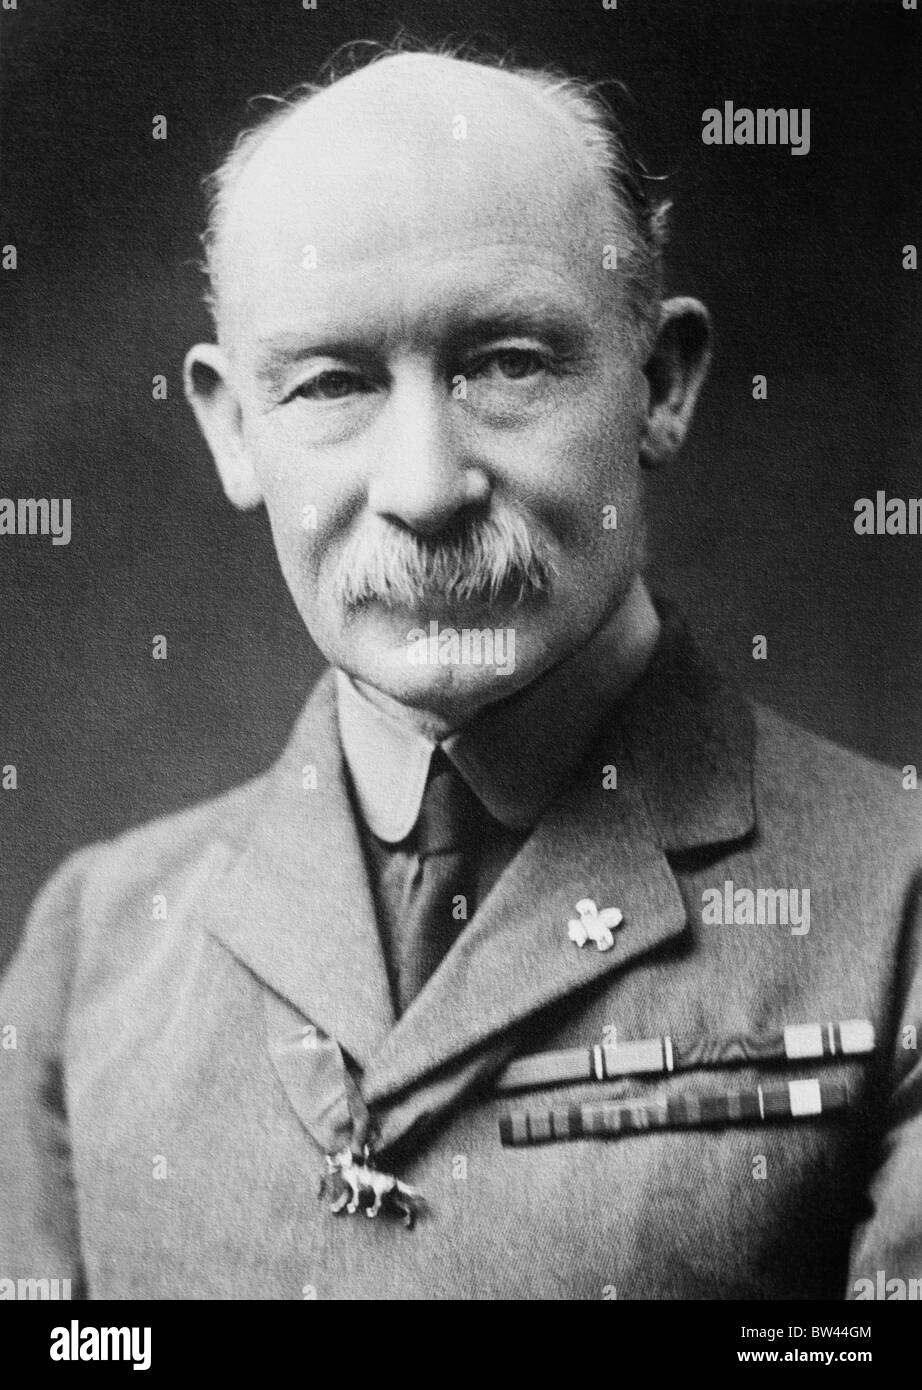 Portrait photo c1910s of Robert Baden-Powell (1857 - 1941) - the British Army General who was the founder of the Scout Movement. Stock Photo